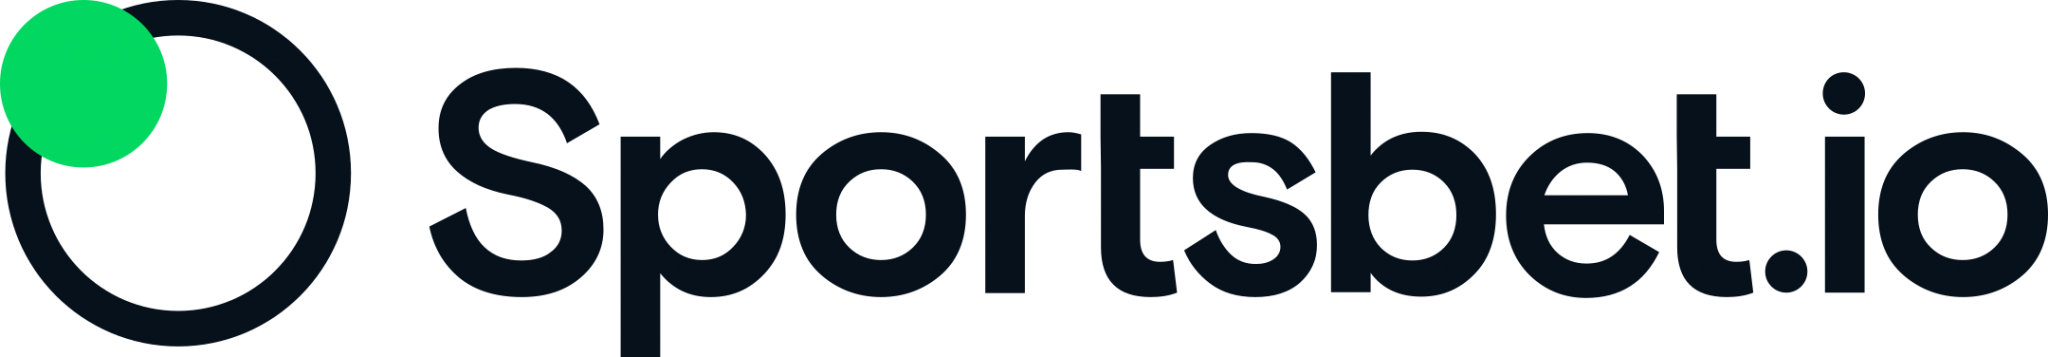 sports sporting bet